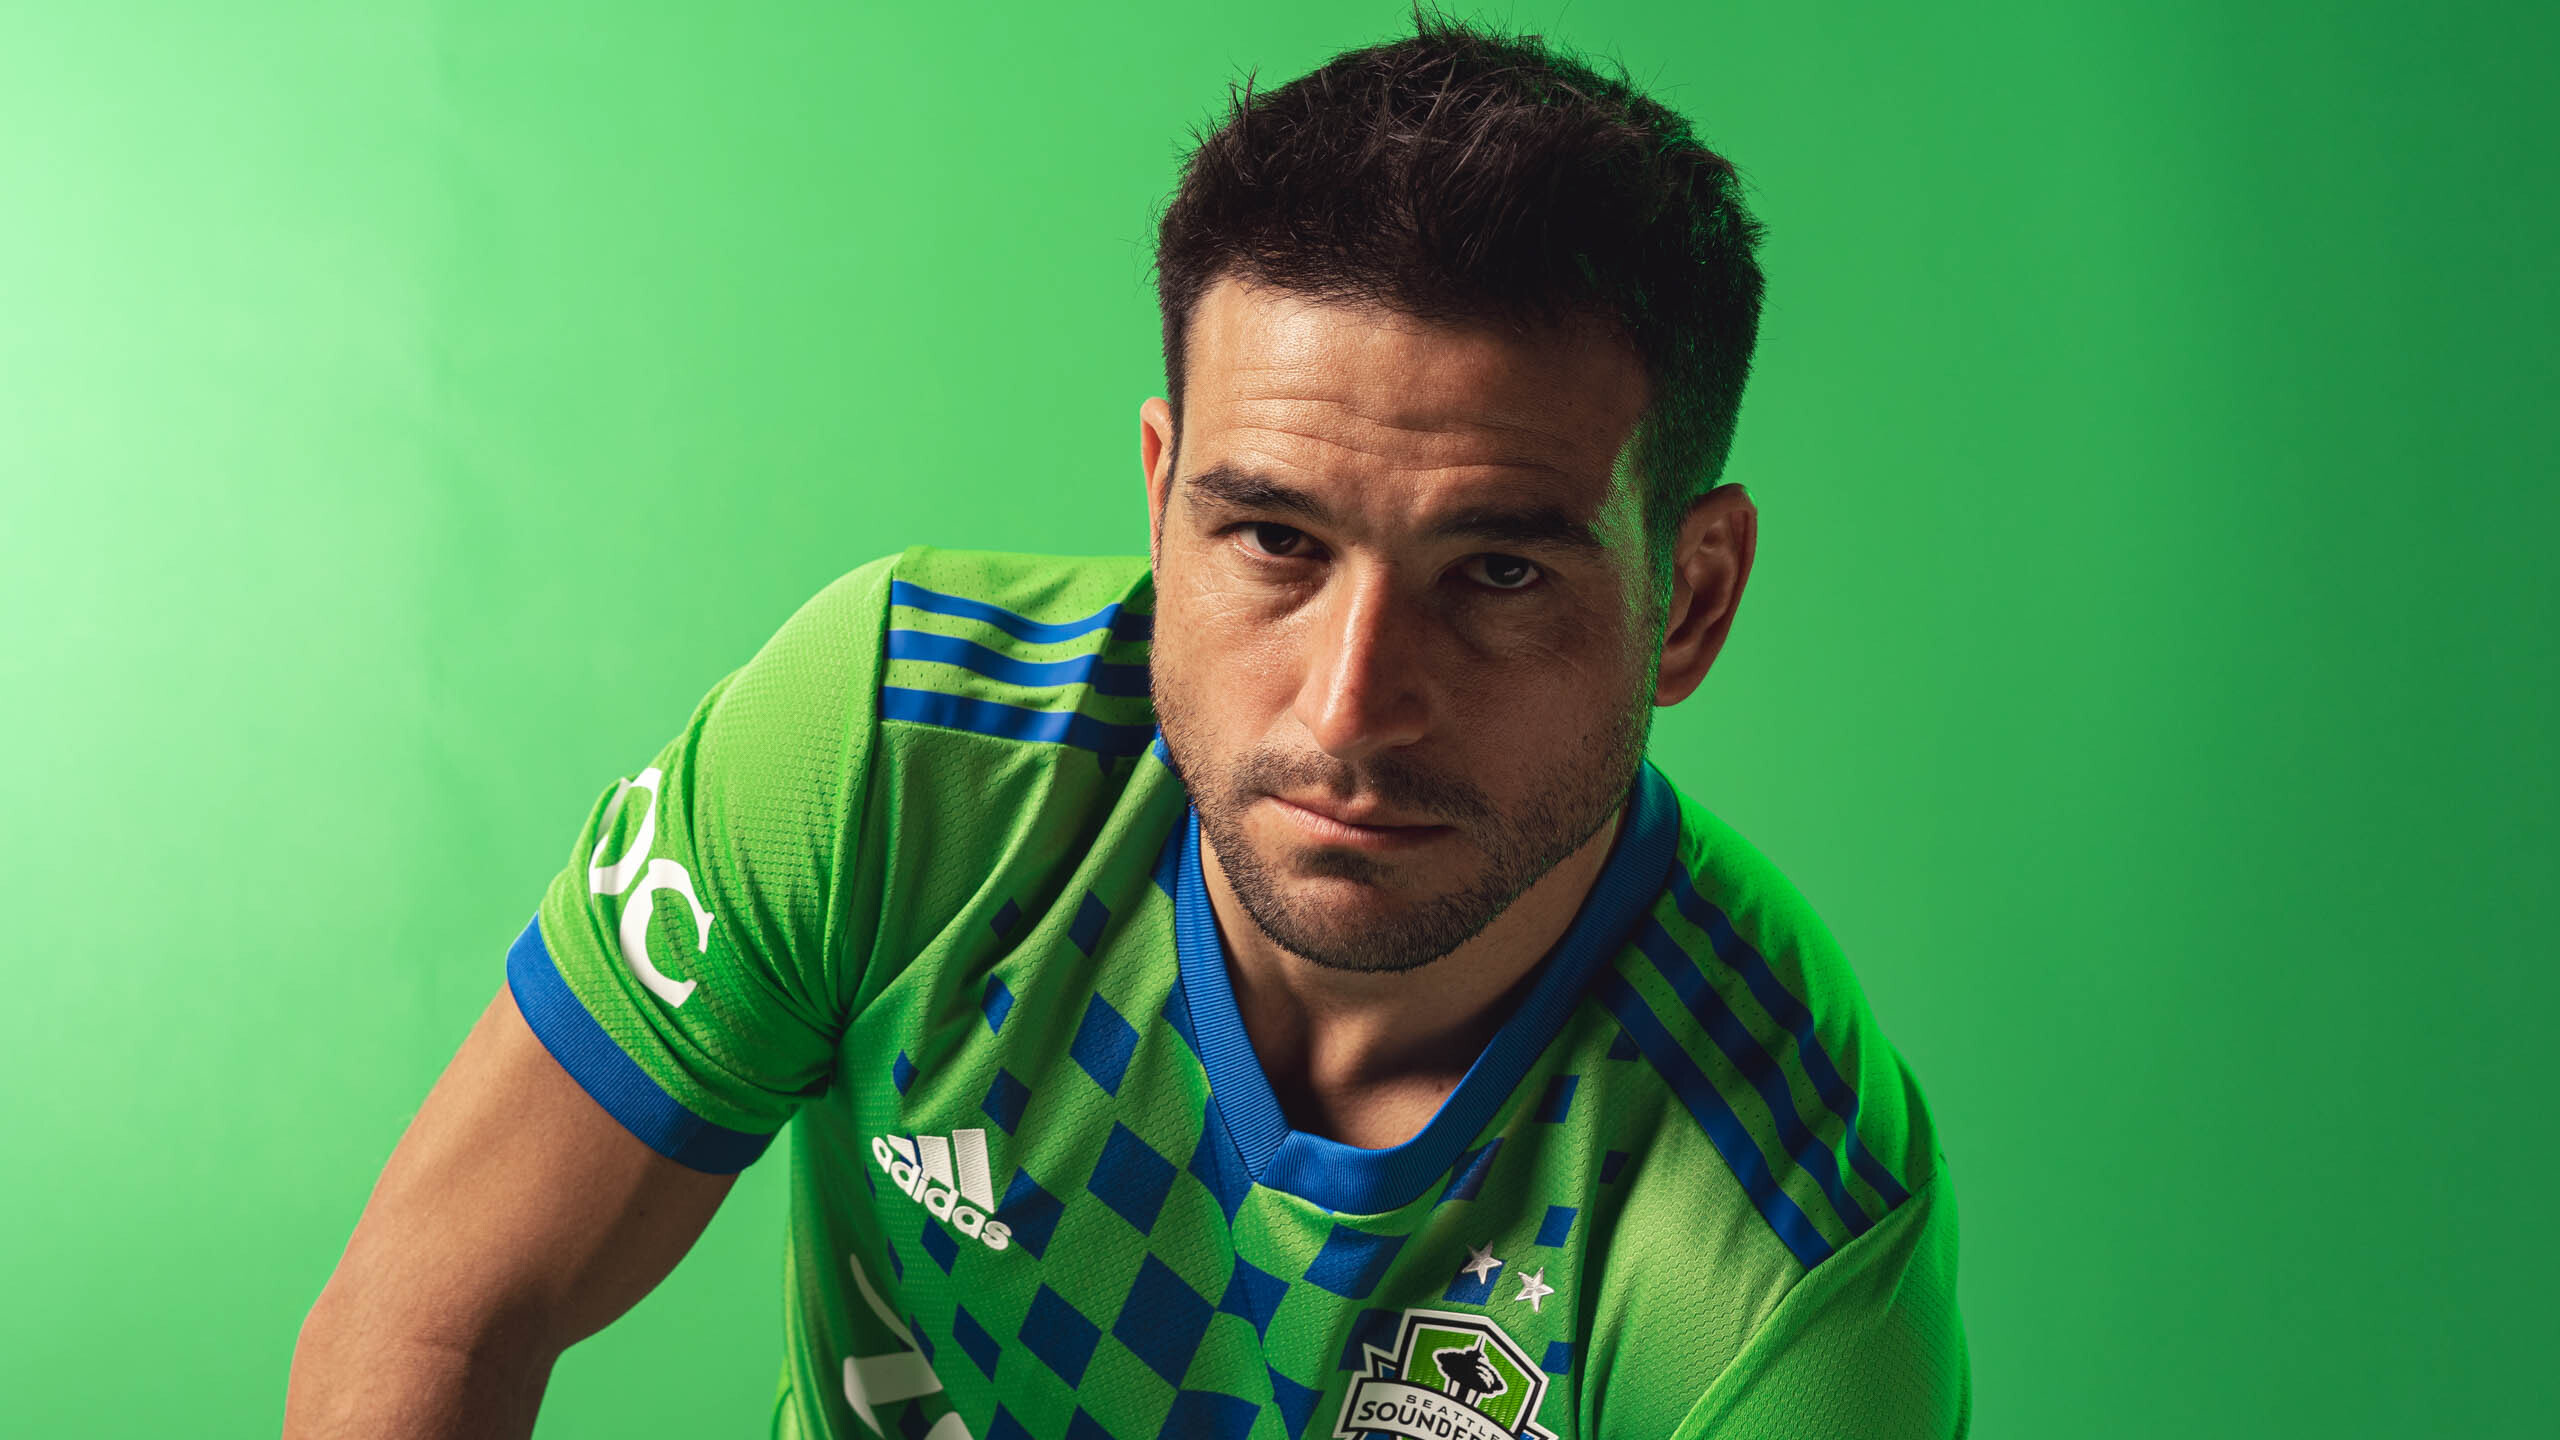 Why are the Sounders green